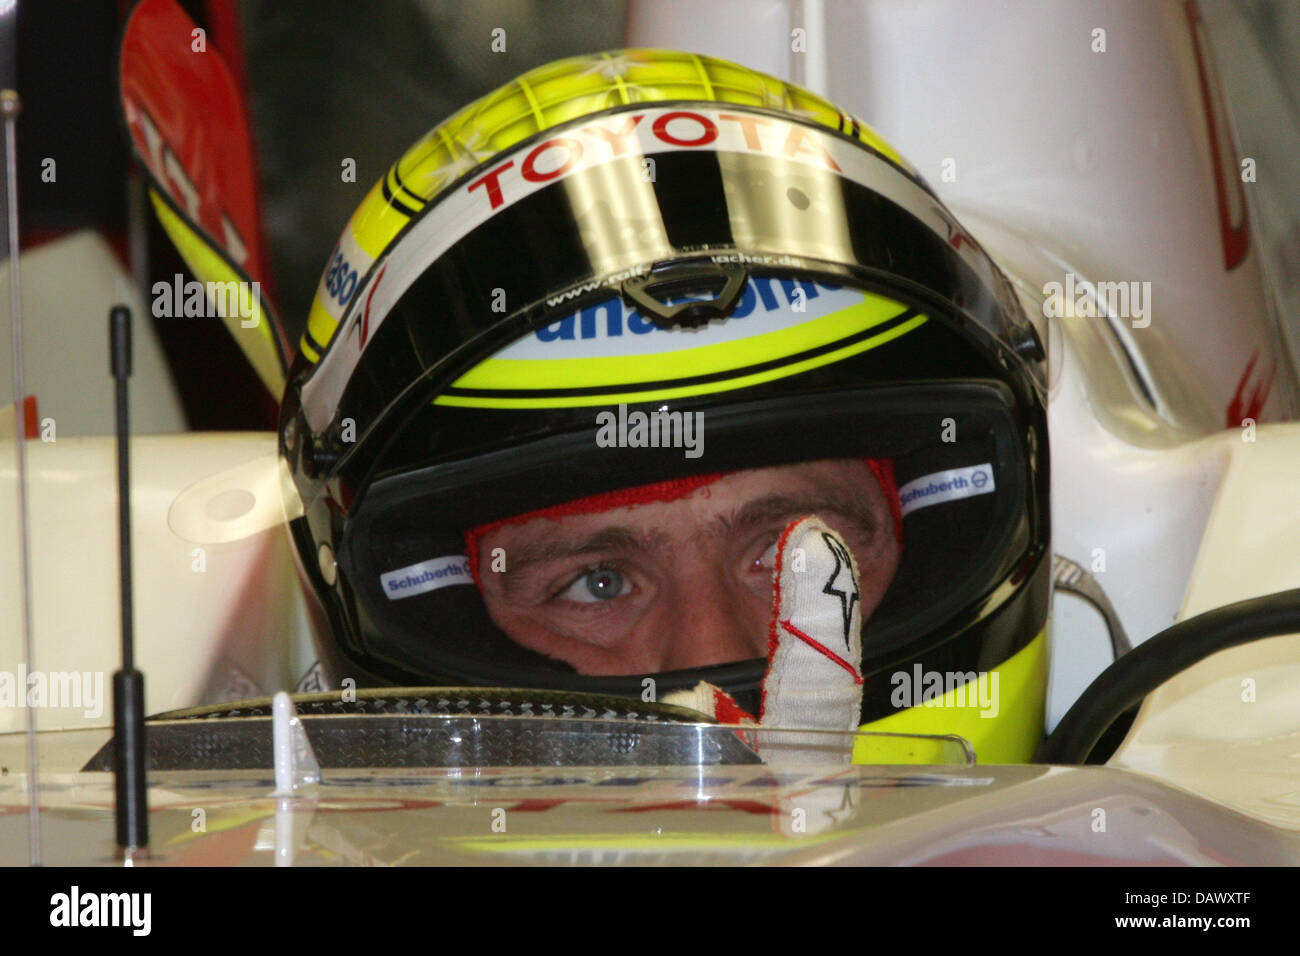 German Formula One pilot Fernando Alonso of Toyota sits in his car during the third practice session at the Circuit de Catalunya race track near Barcelona, Spain, 12 May 2007. The 2007 Formula 1 Grand Prix of Spain takes place on 13 May. Photo: Jens Buettner Stock Photo